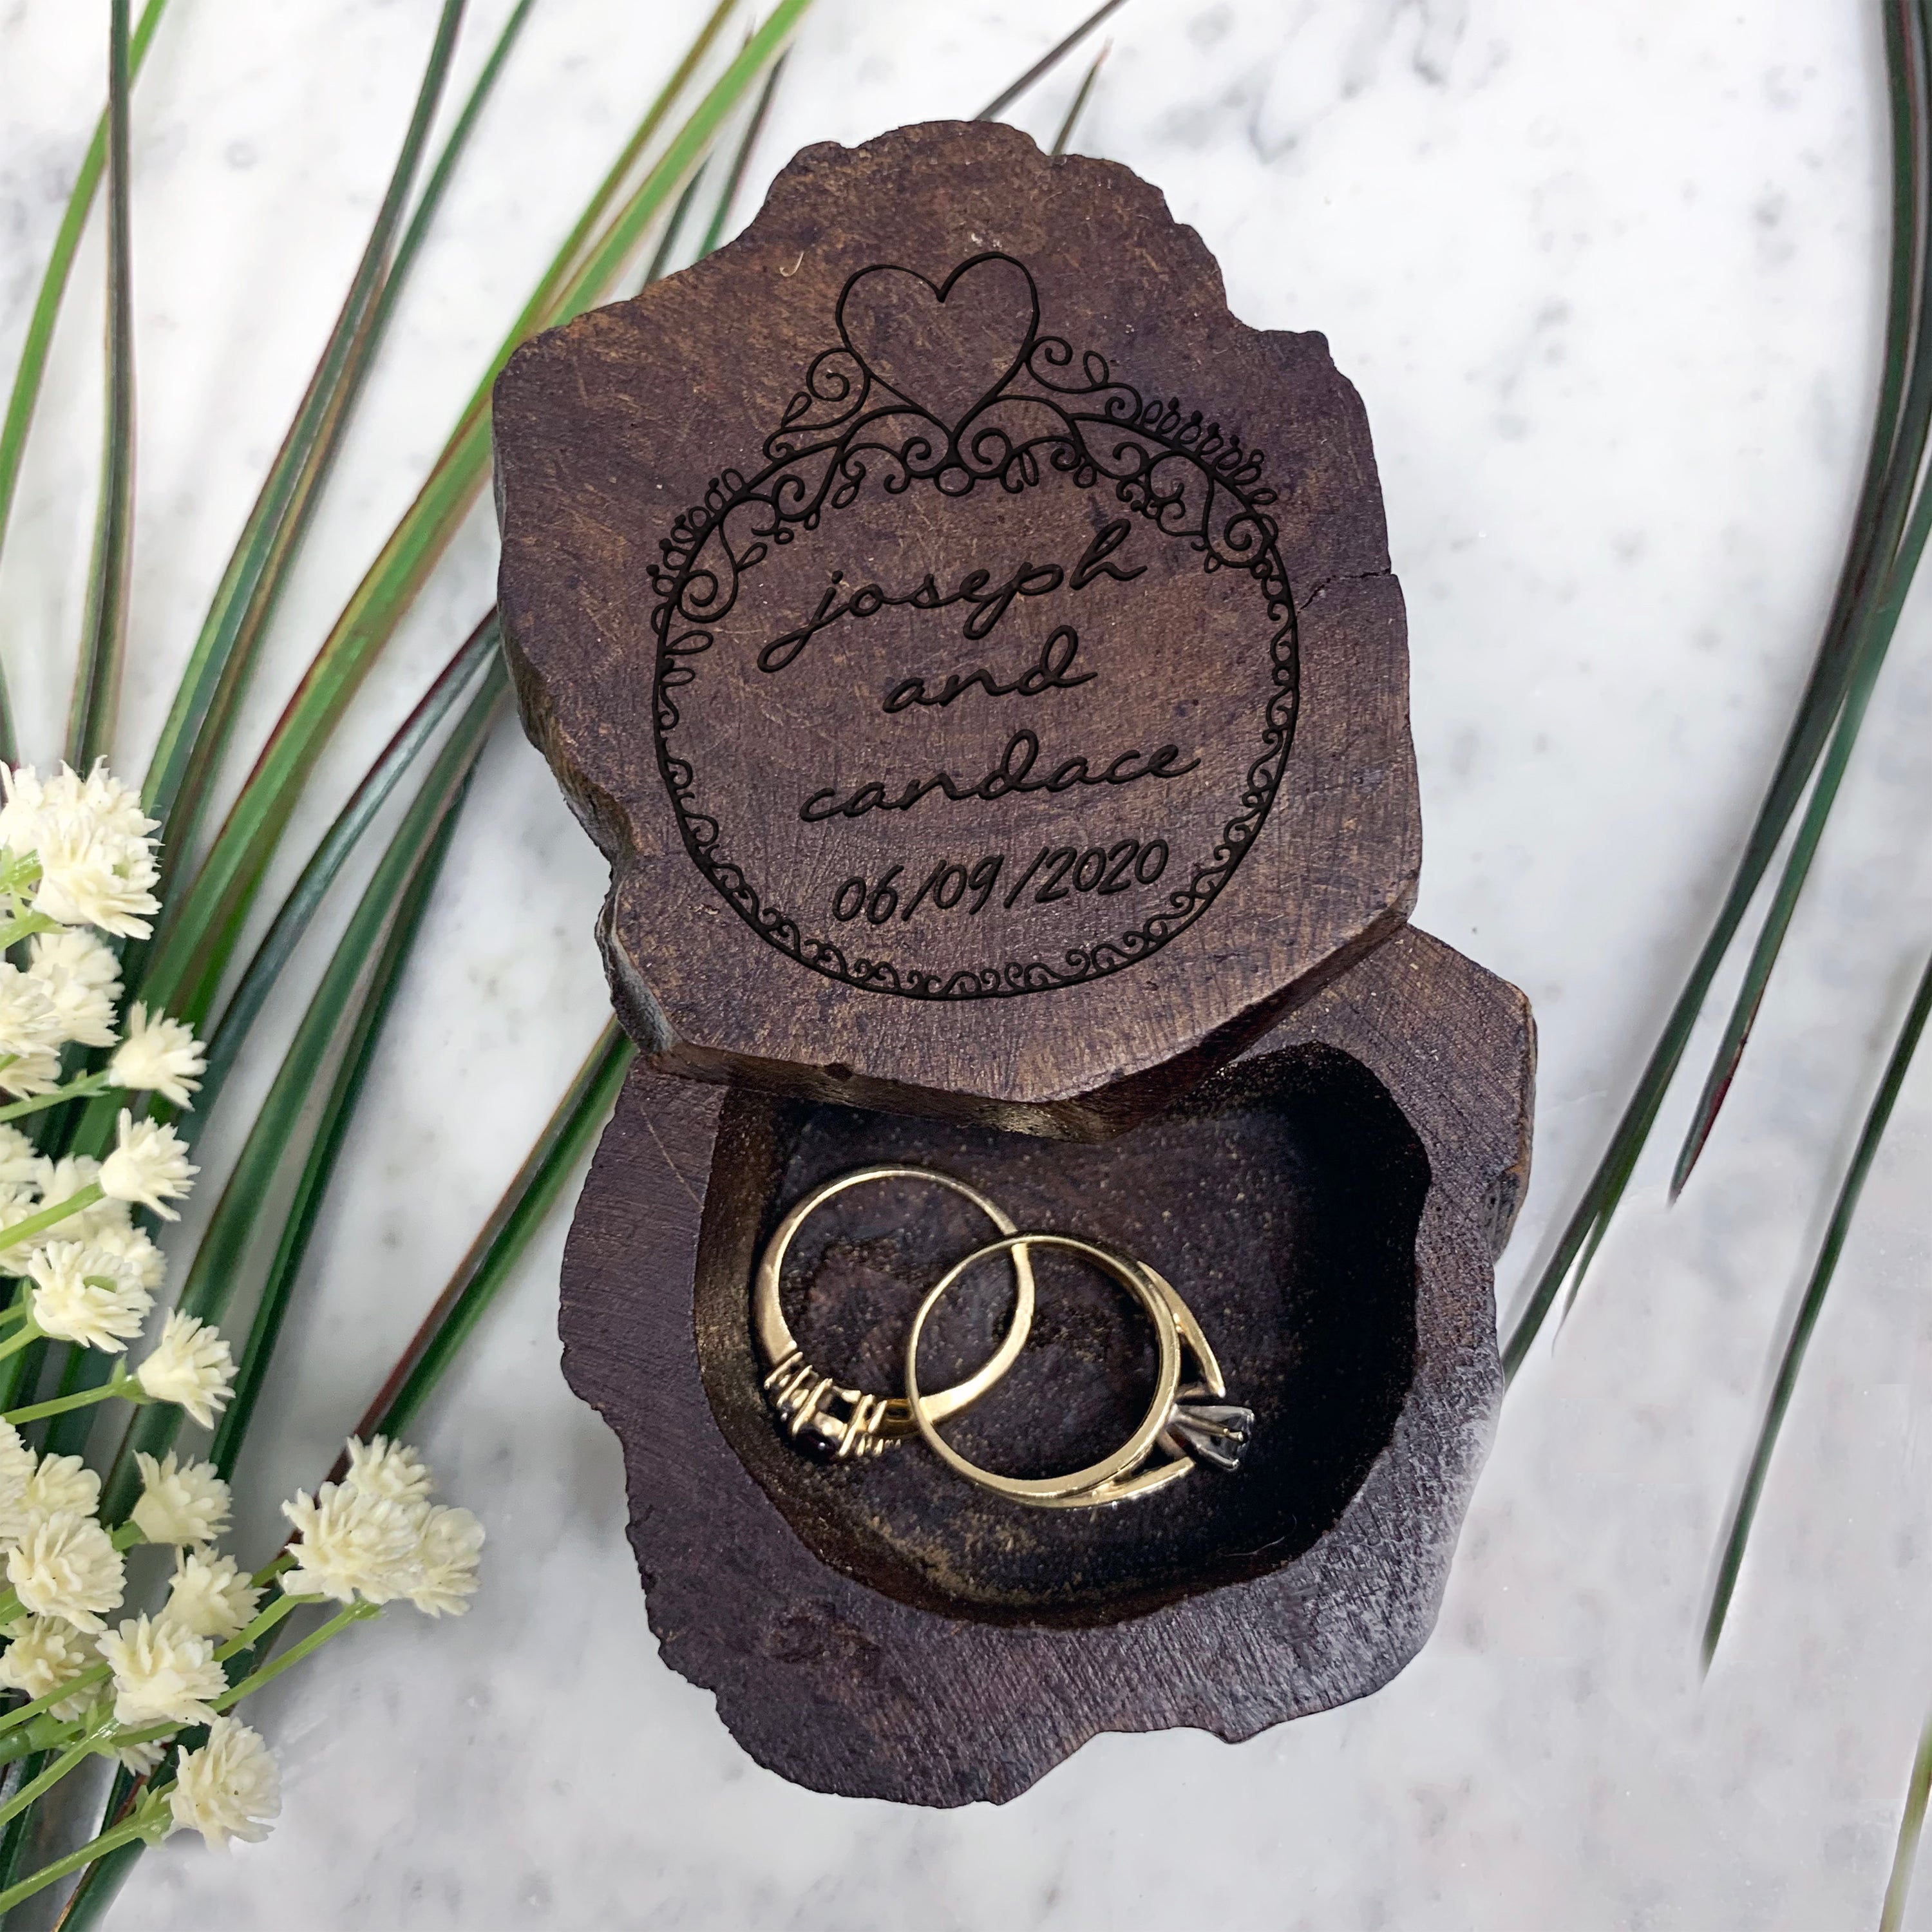 Wood ring boxes for wedding rings and engagement rings